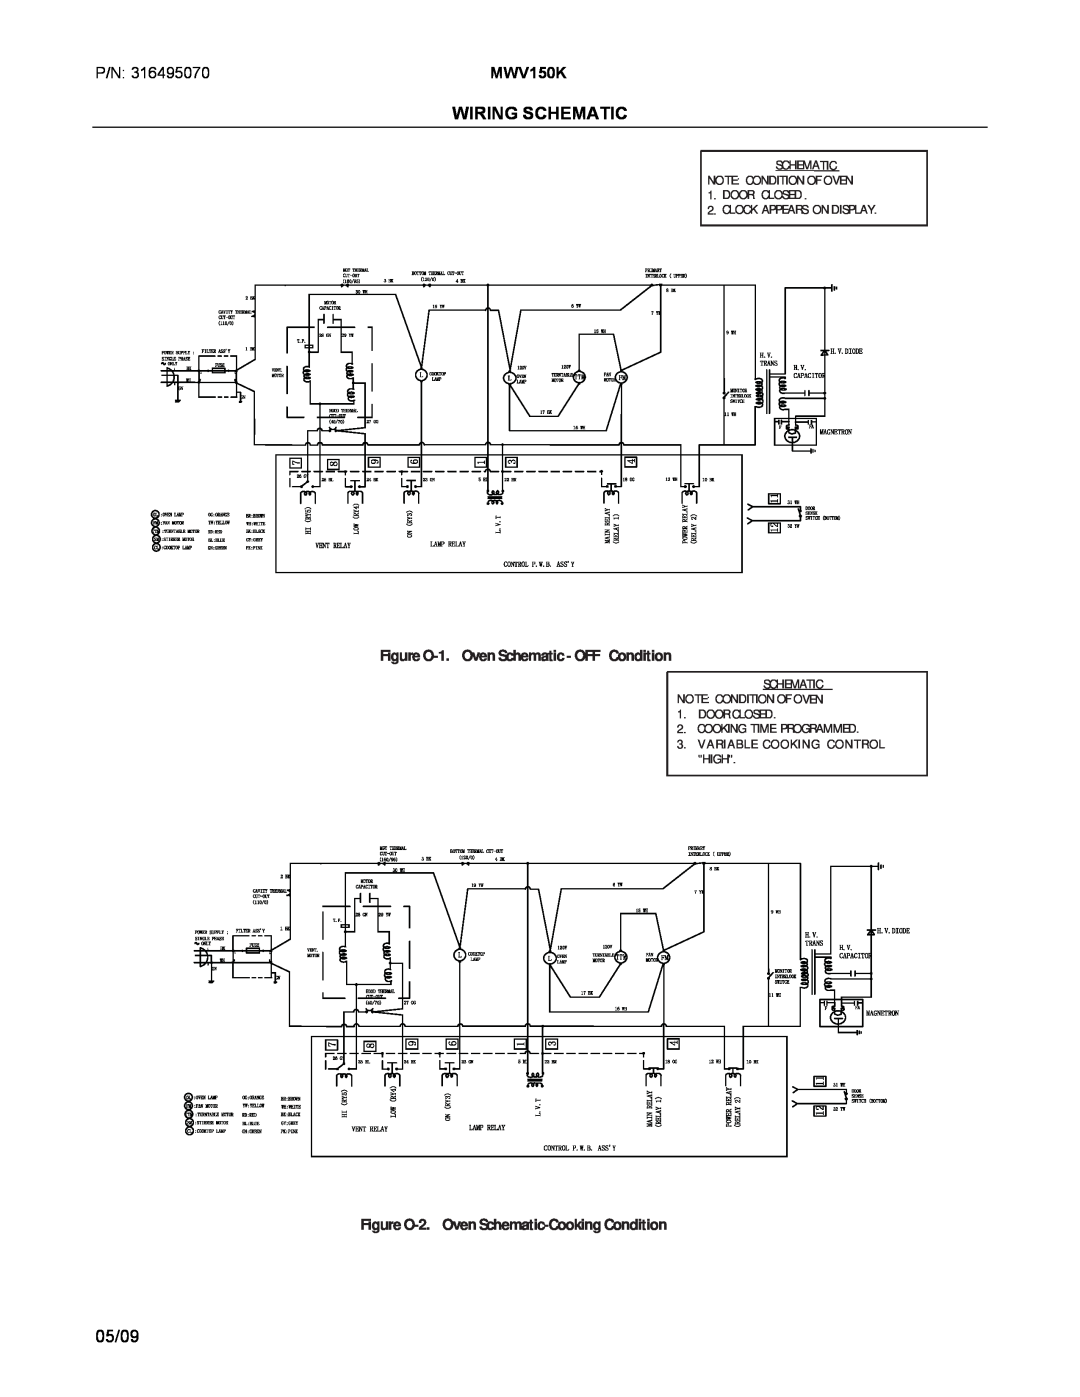 Frigidaire 316495070 manual Wiring Schematic, 05/09, P/N, MWV150K, Figure O-1.Oven Schematic- OFF Condition 